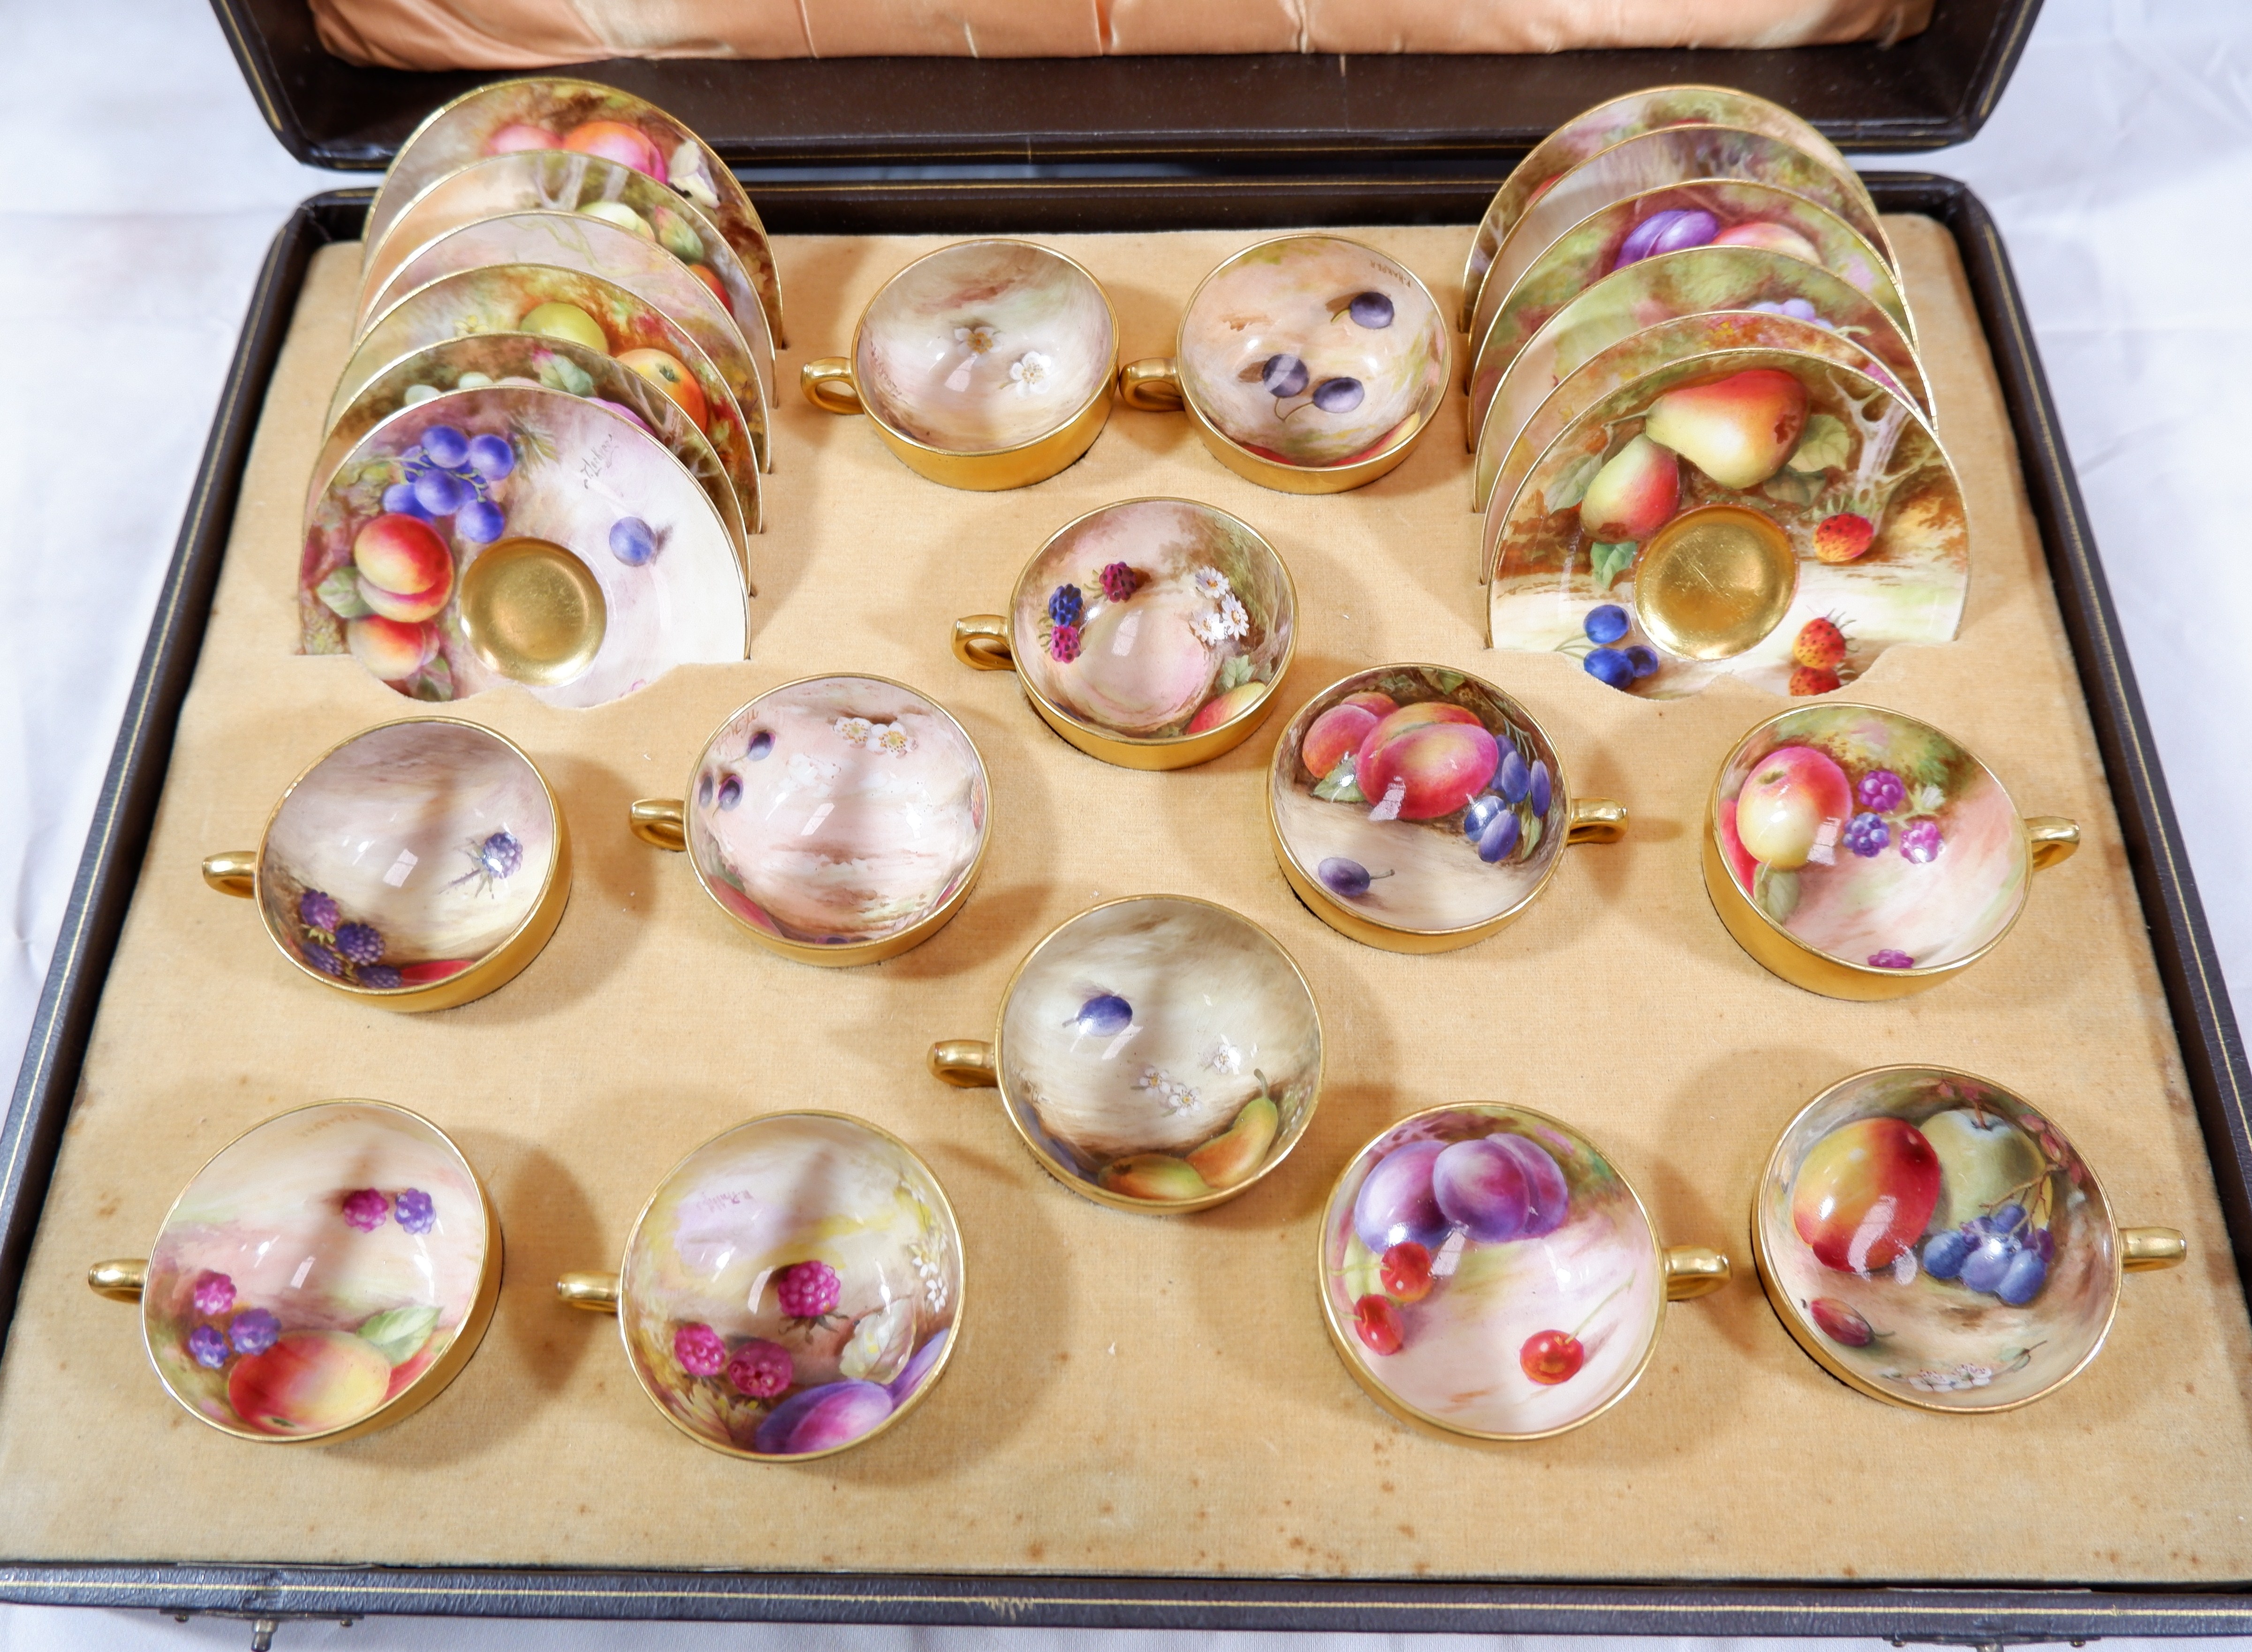 A set of Royal Worcester porcelain cabinet cups and saucers decorated with fruit on mossy banks,